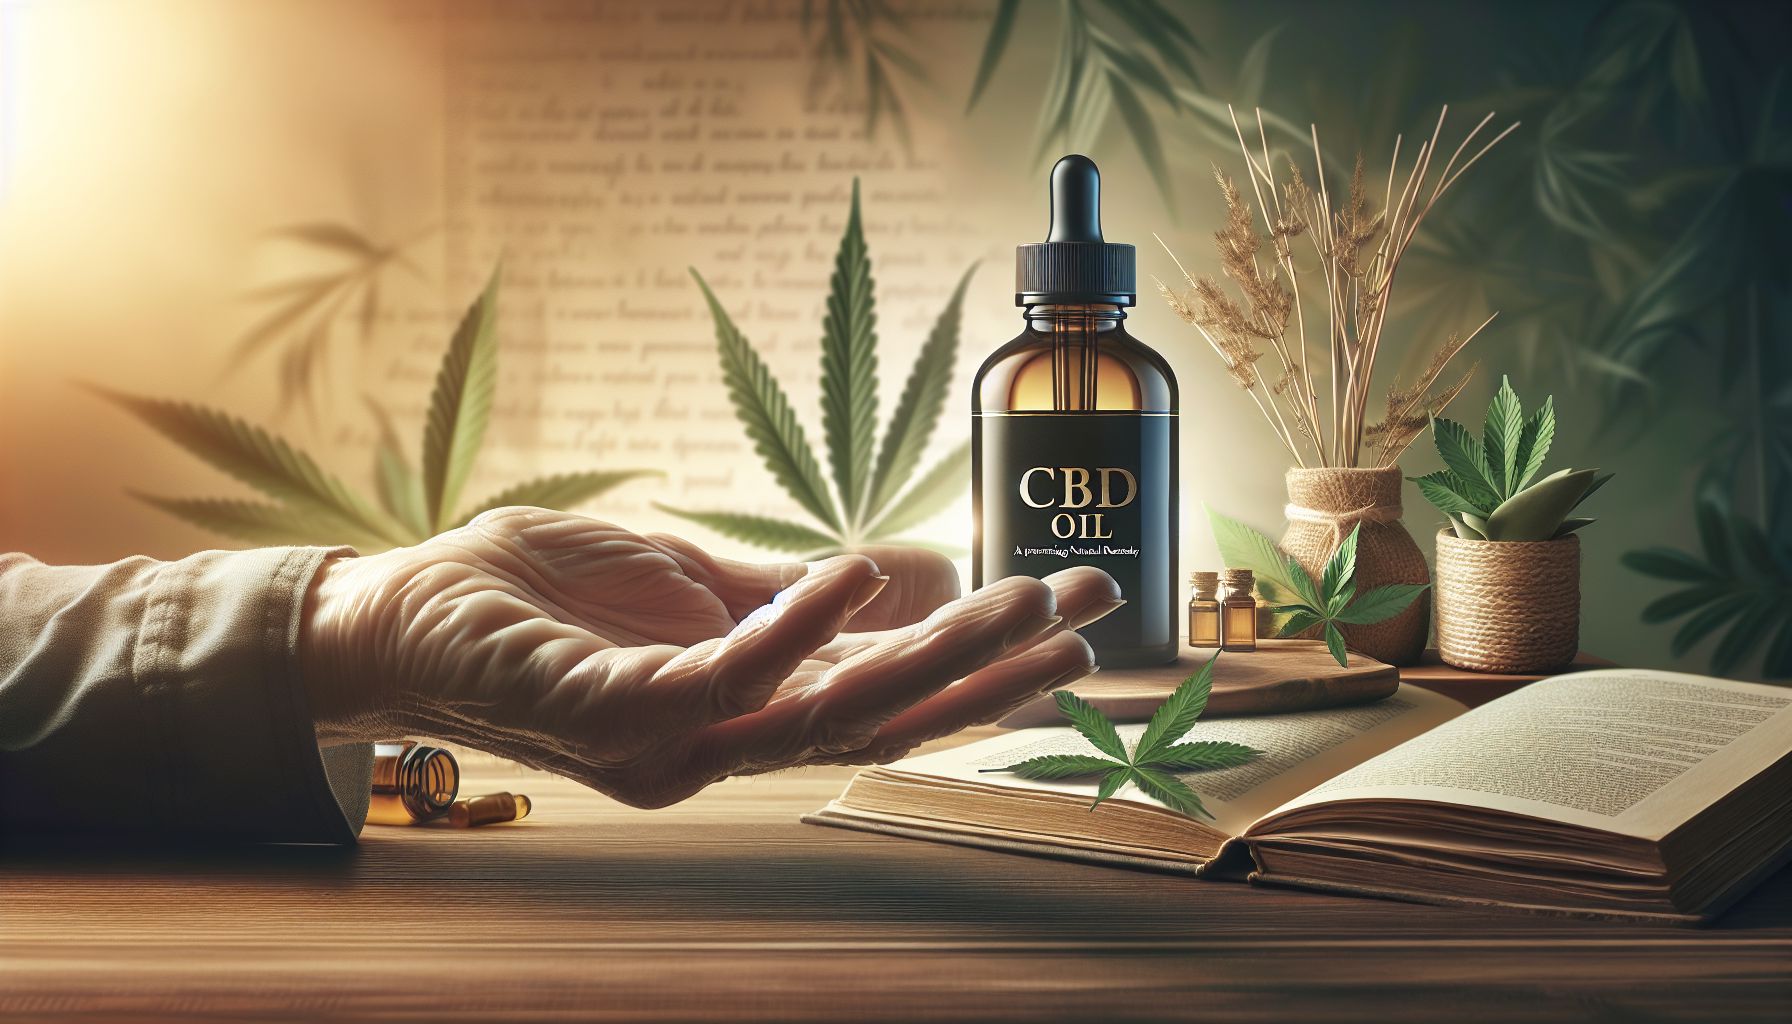 CBD Oil for Middle Aged Women: A Promising Natural Remedy